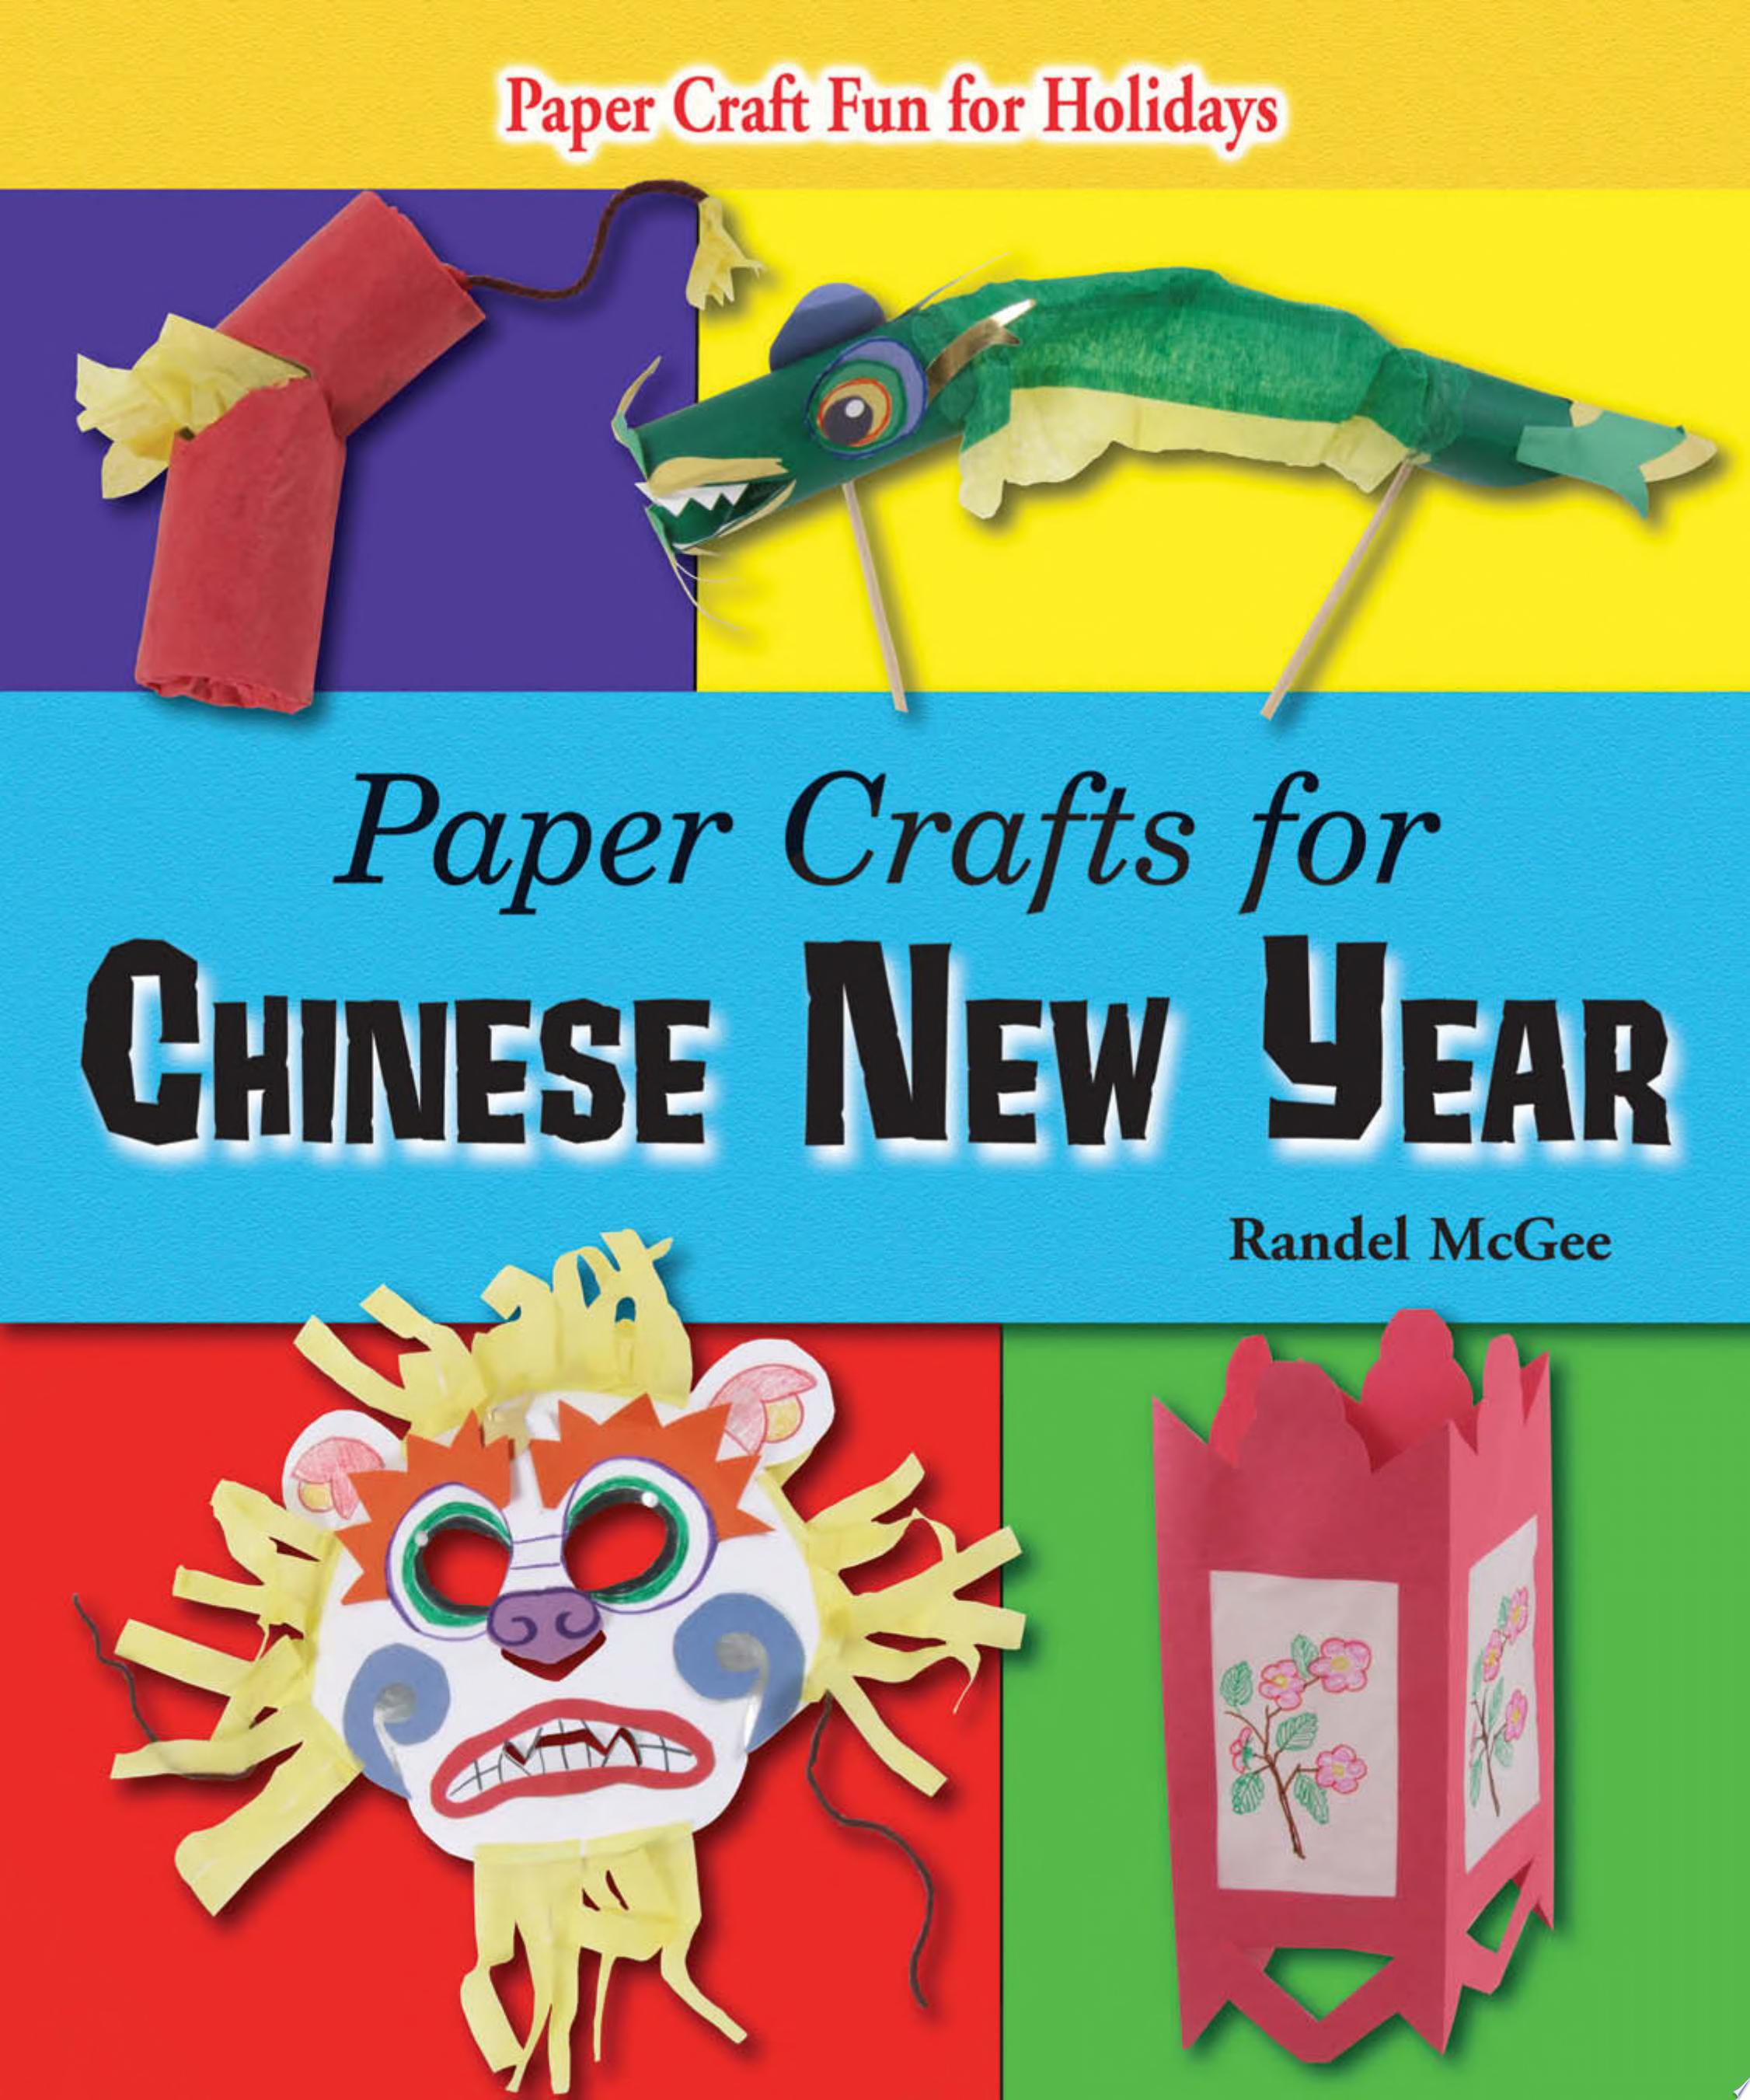 Image for "Paper Crafts for Chinese New Year"